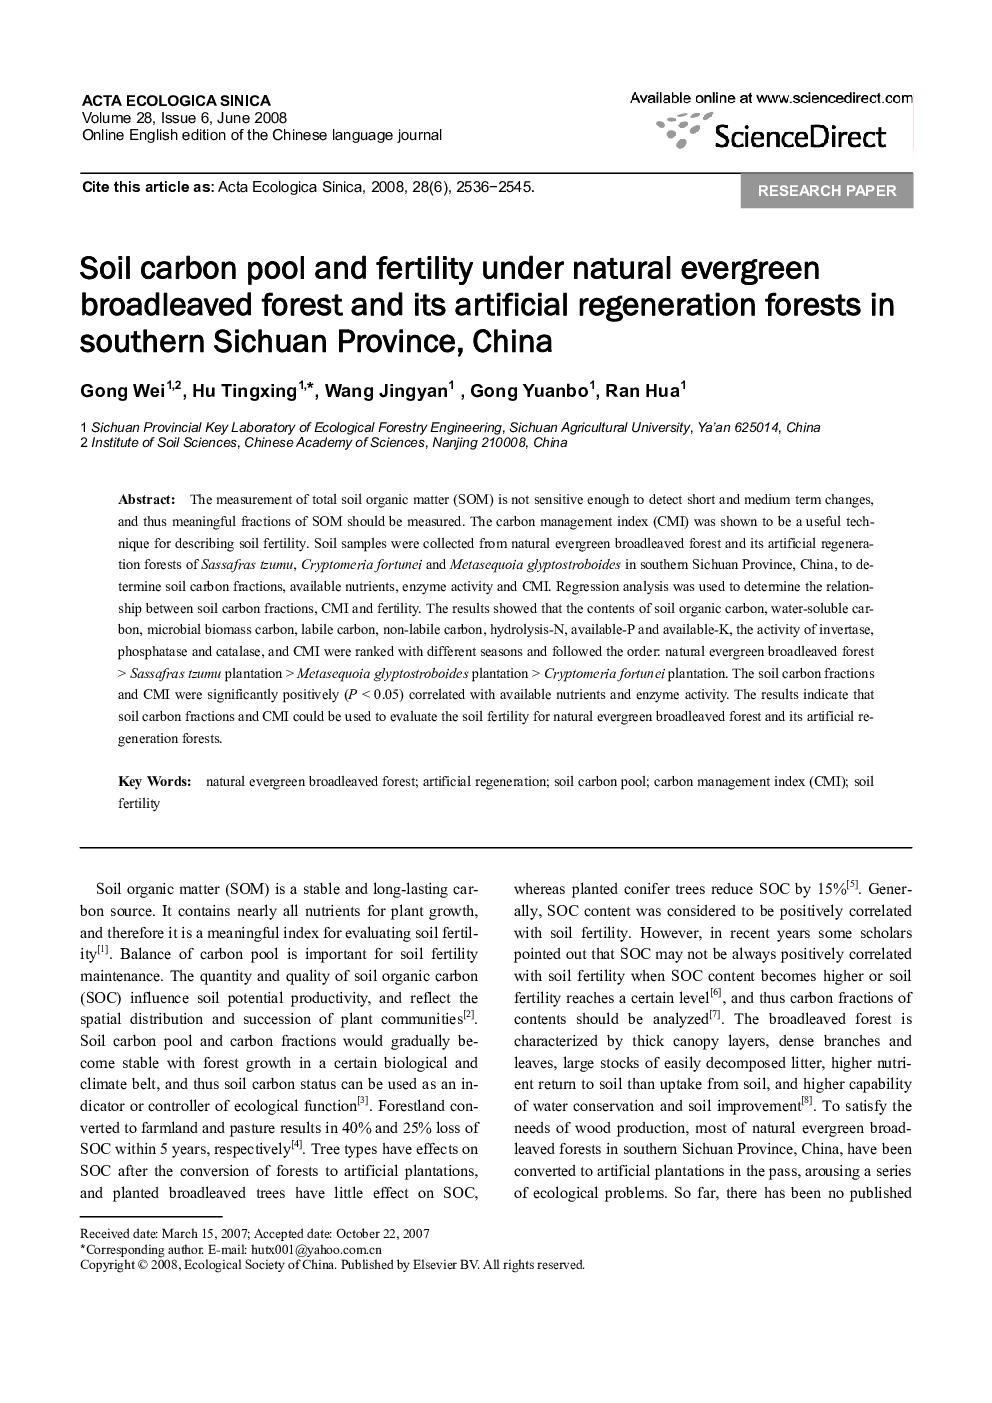 Soil carbon pool and fertility under natural evergreen broadleaved forest and its artificial regeneration forests in southern Sichuan Province, China